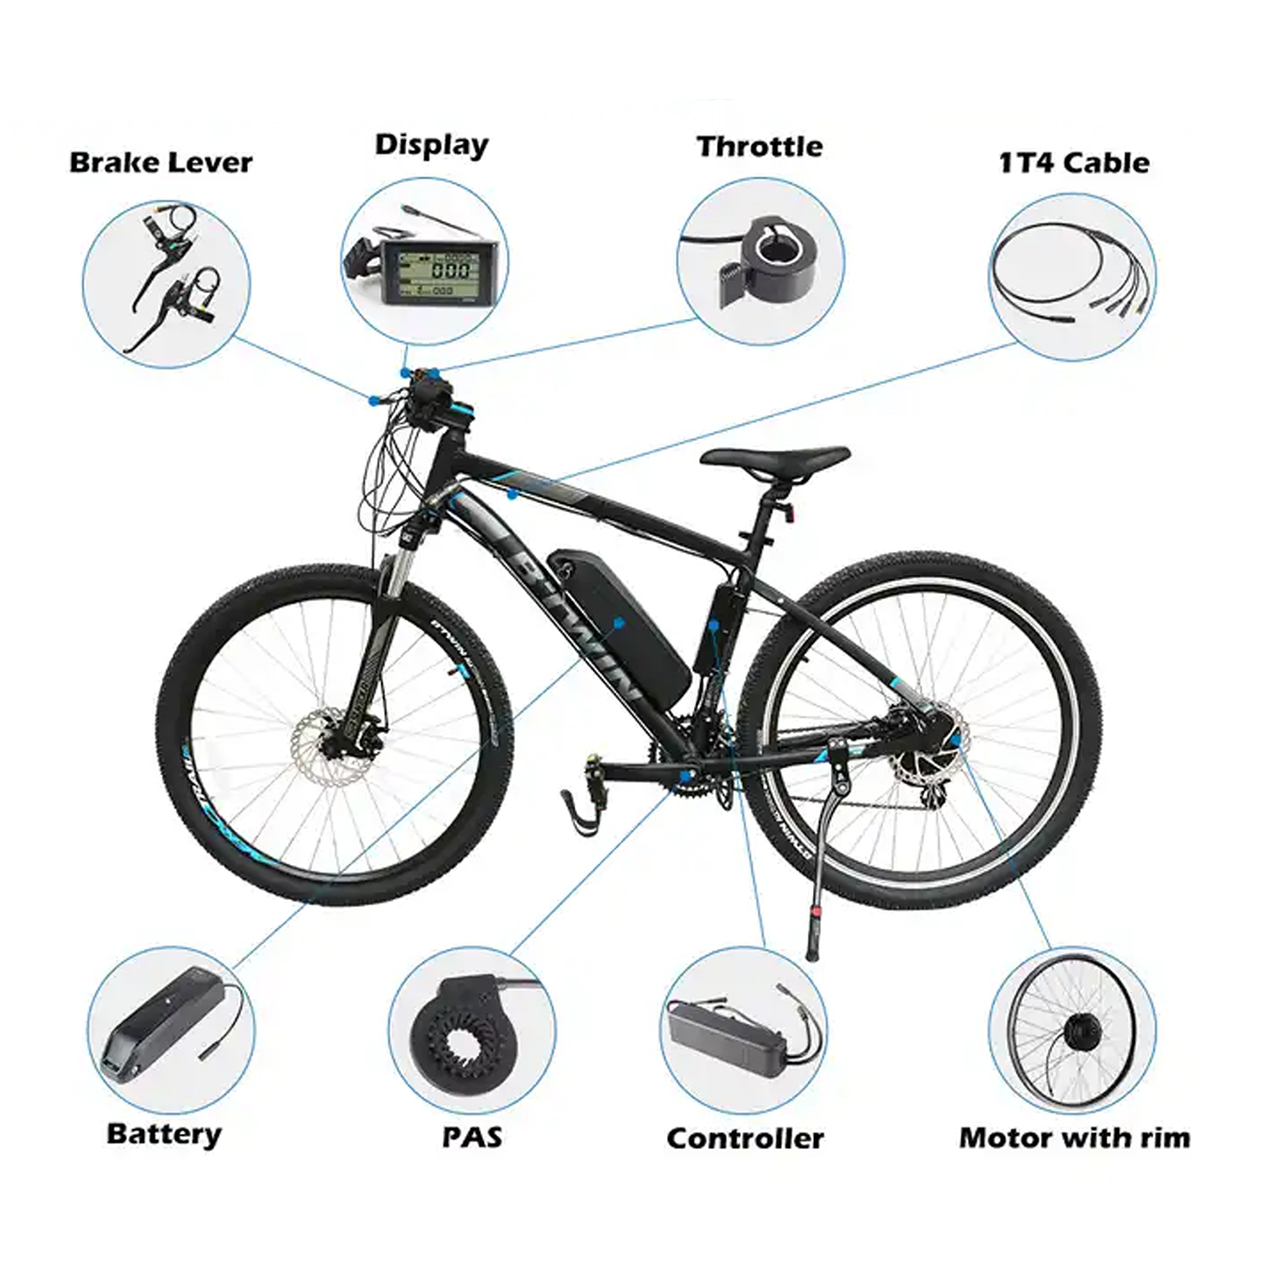 20" 24" 26" 700c 28" 29" 1000w Brushless Direct Hub Motor Electric Bicycle Ebike Conversion Kit with Lithium Battery (optional)